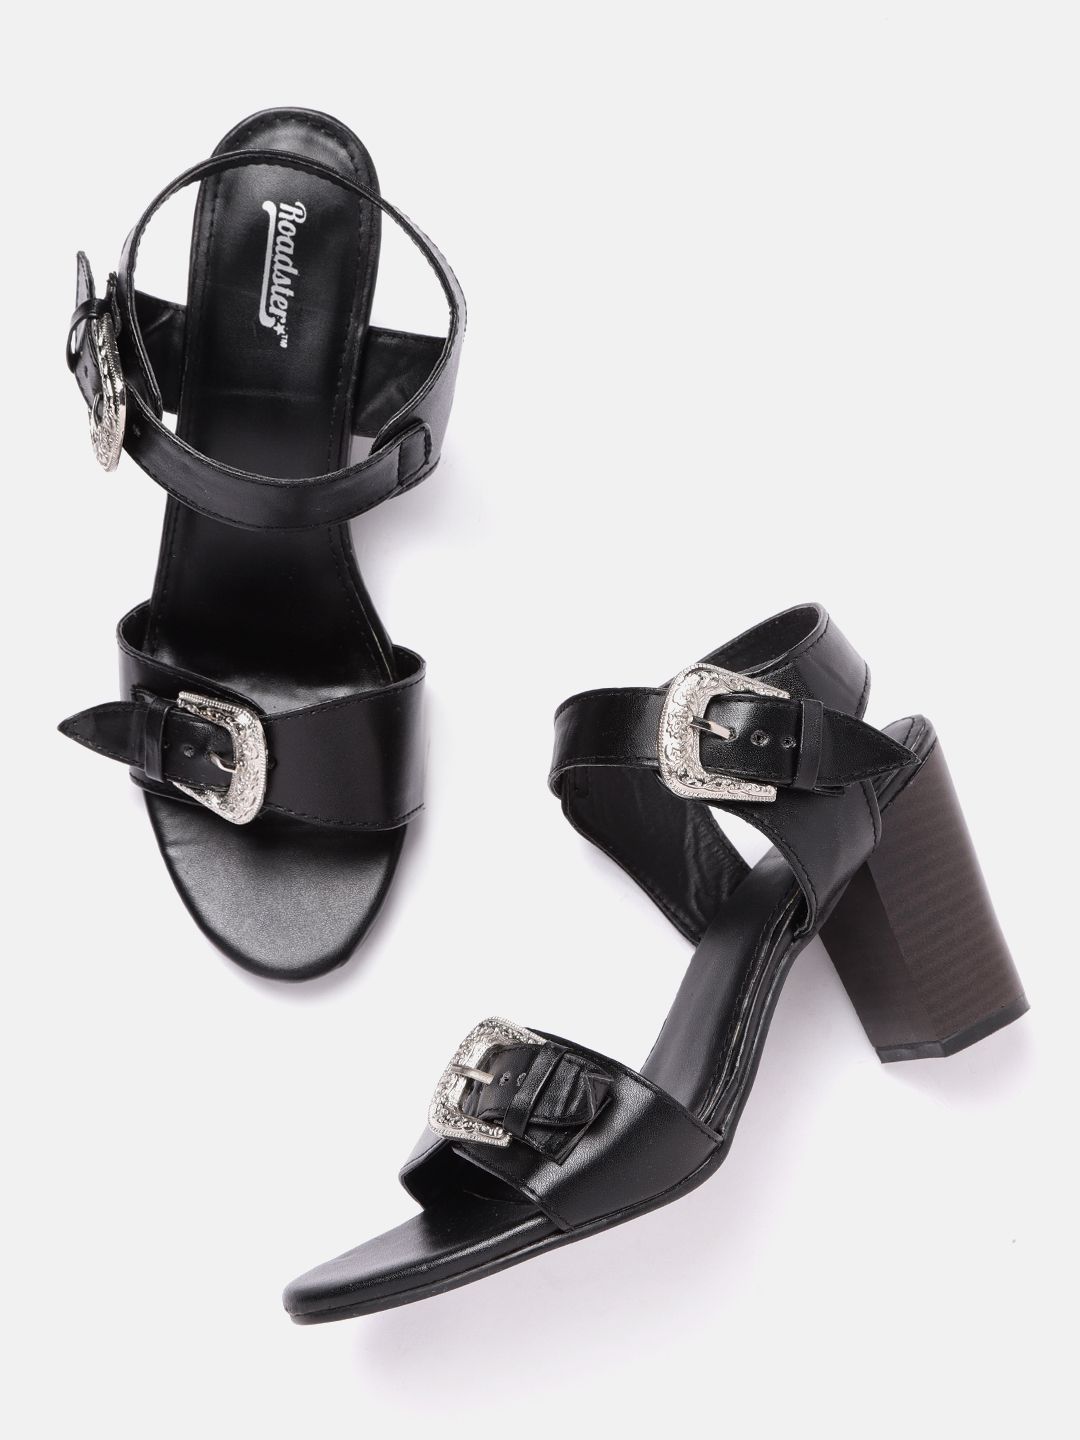 The Roadster Lifestyle Co Black Solid Block Heels with Buckles Price in India